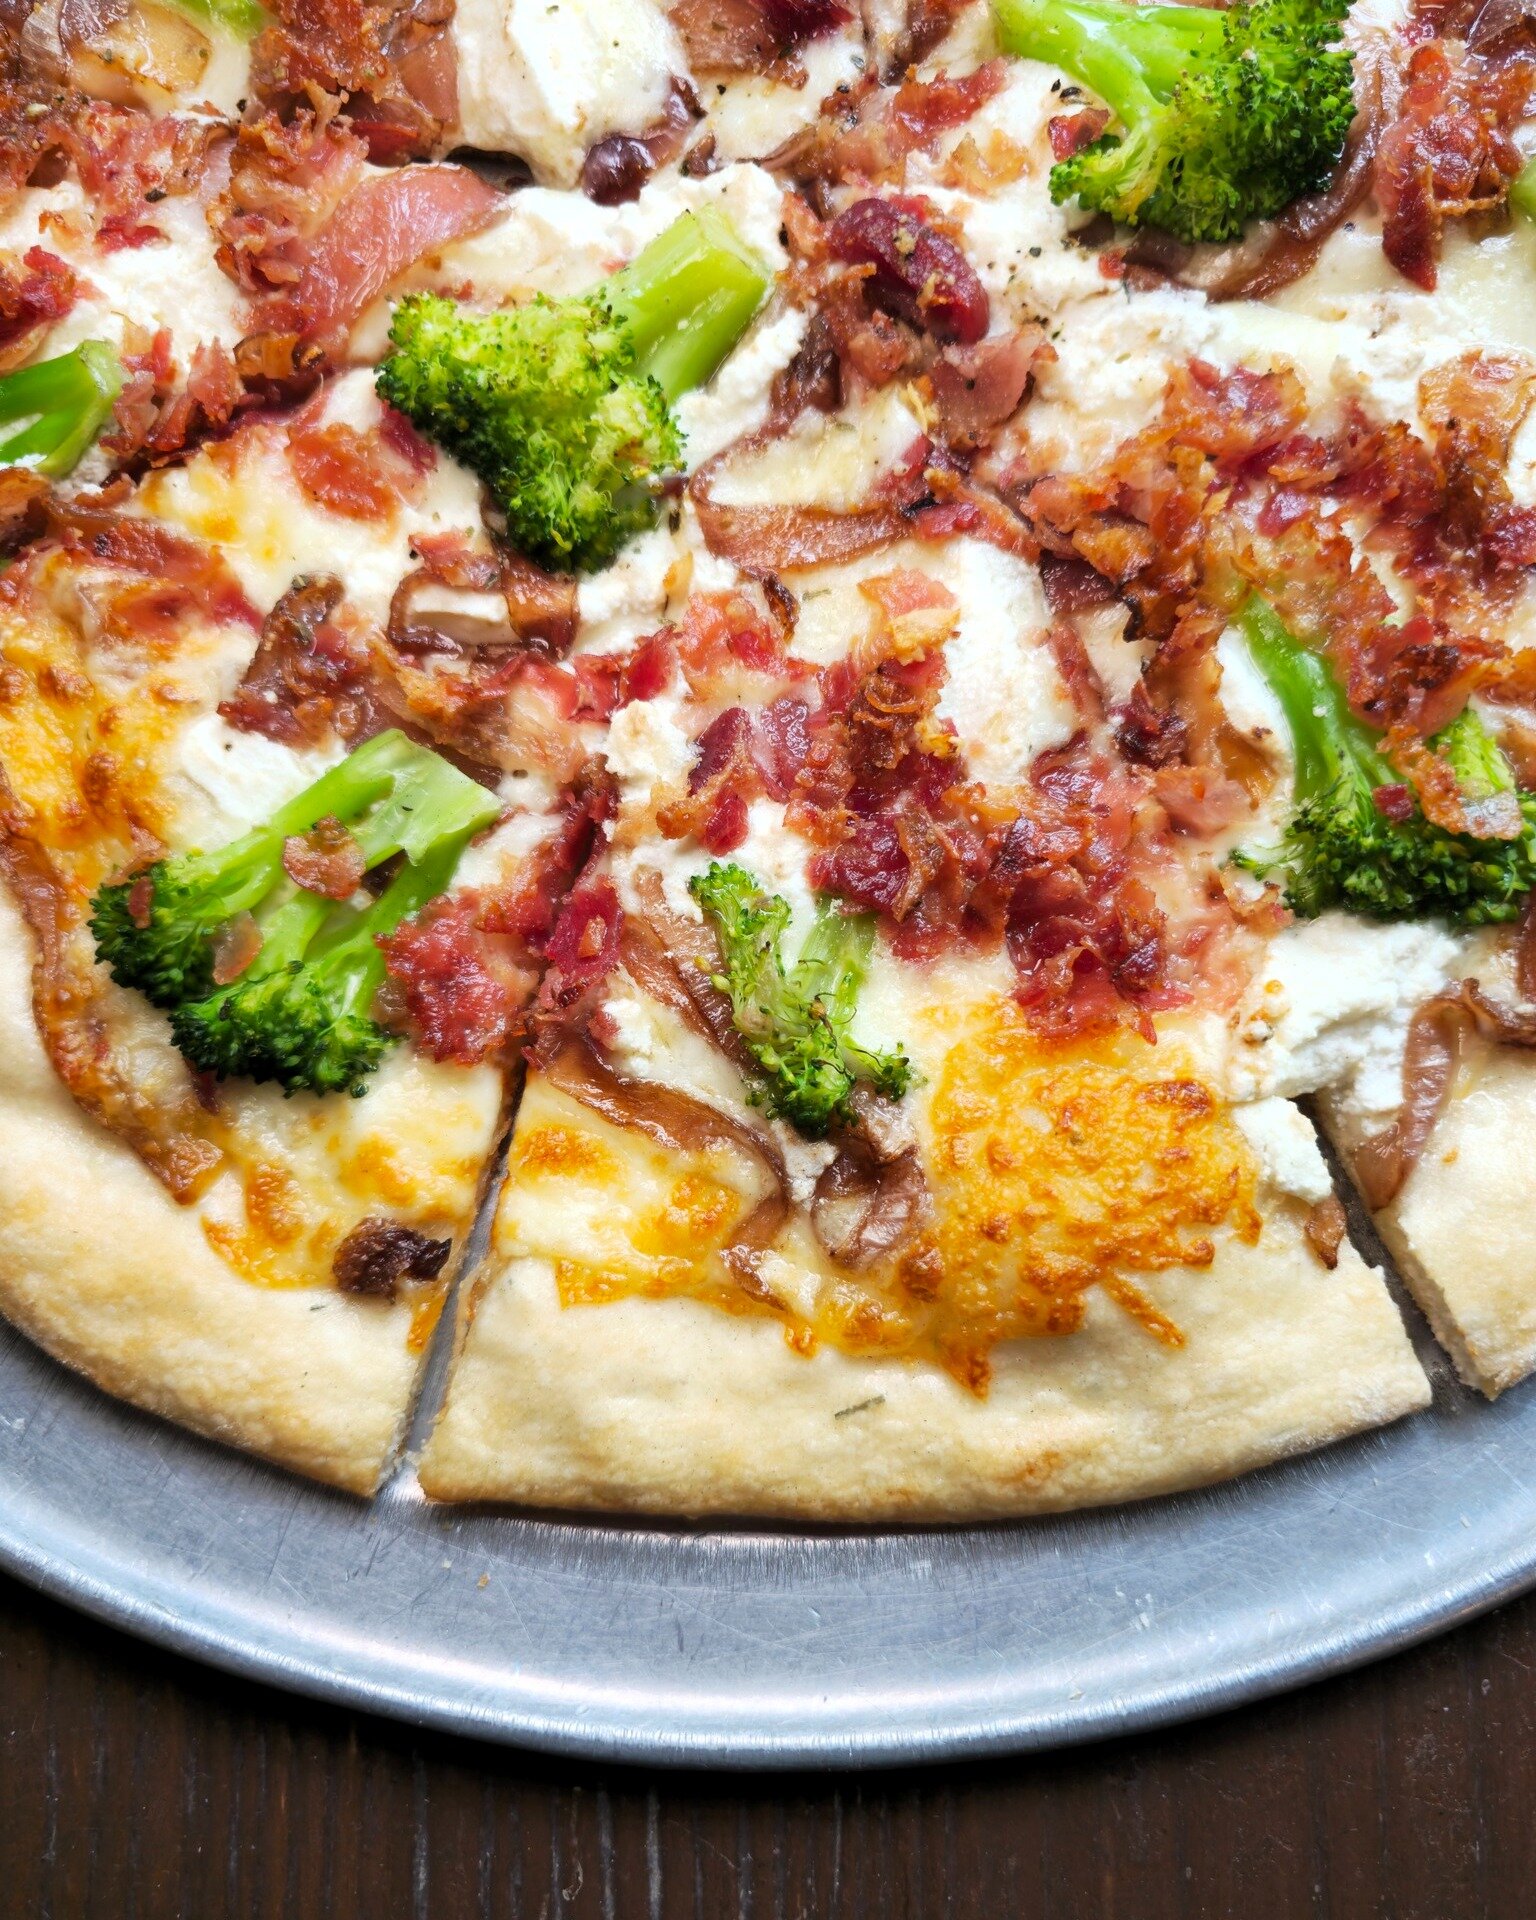 Parting is such sweet sorrow! Today is the last day to try the Bacon Broccoli pizza. Smoky bacon, fresh broccoli, caramelized balsamic onions, + ricotta are a combo you won't want to miss!

We are also pouring $6 glasses of red and white sangria with